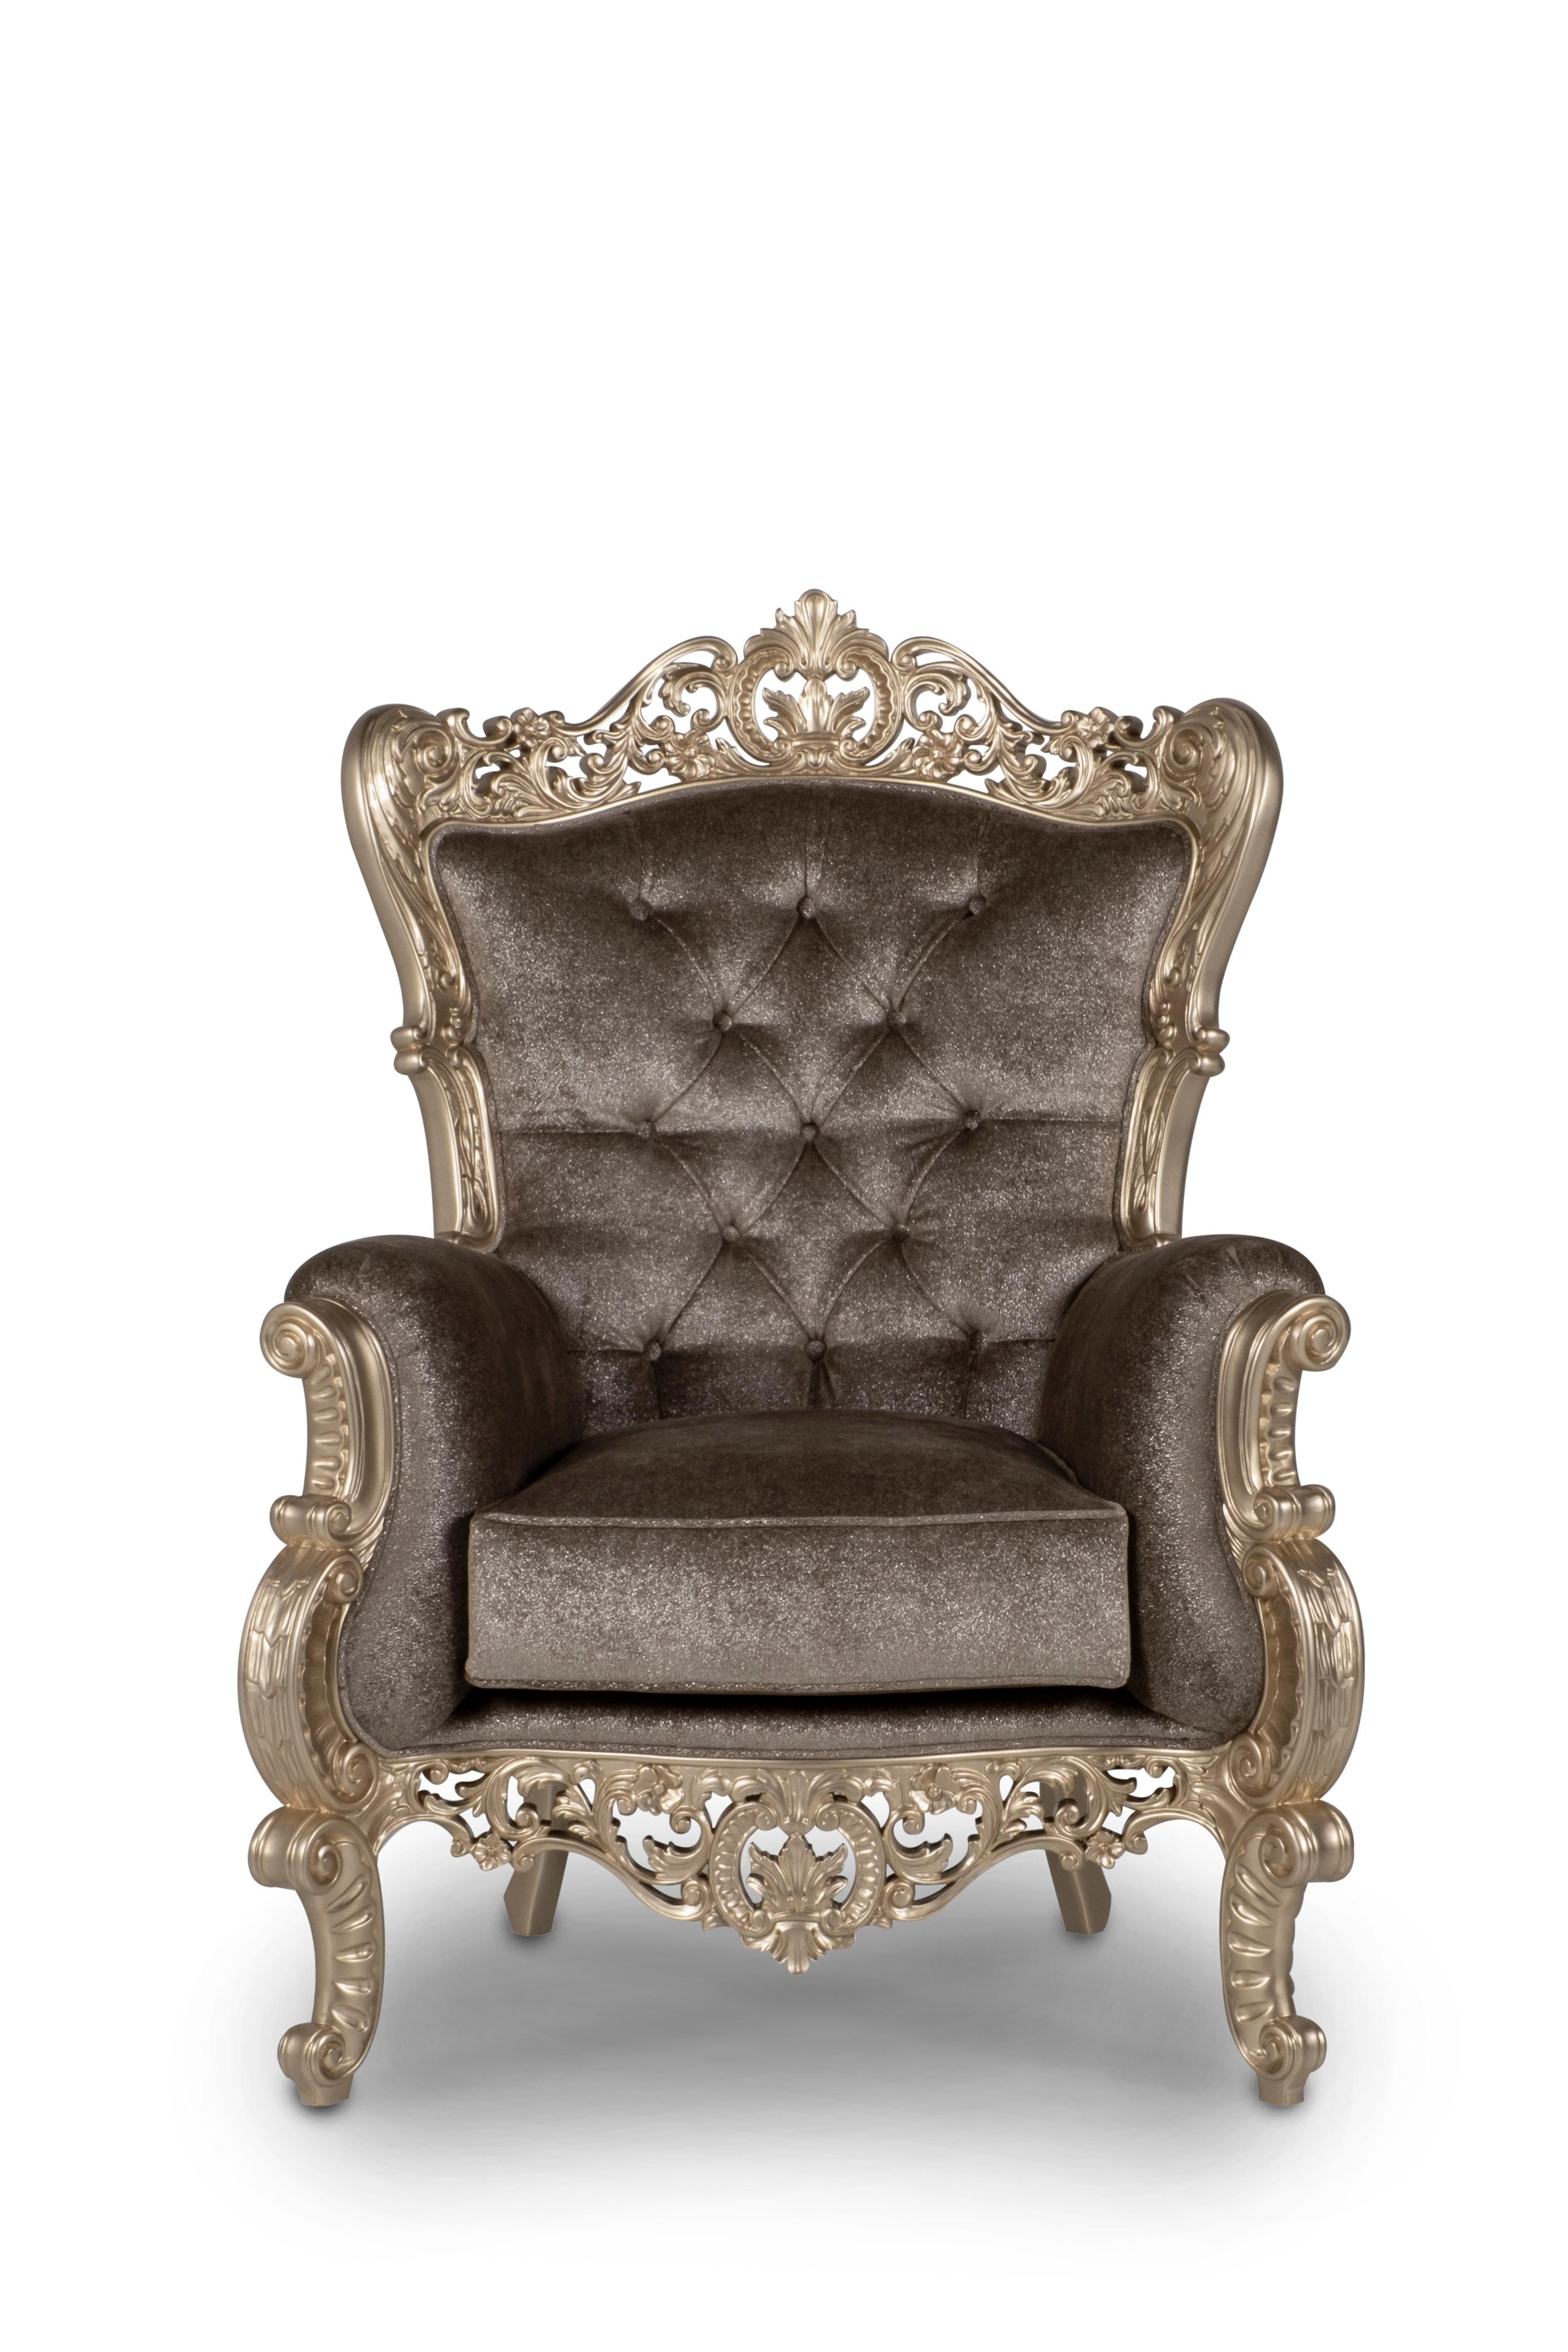 French Neoclassical Christien Armchair, Neoclassical collection, handcrafted in Portugal - Europe by GF Modern.

A French Neoclassical style armchair, Christien is handcarved in linden wood and lacquered in champagne bronze powder with a high-gloss